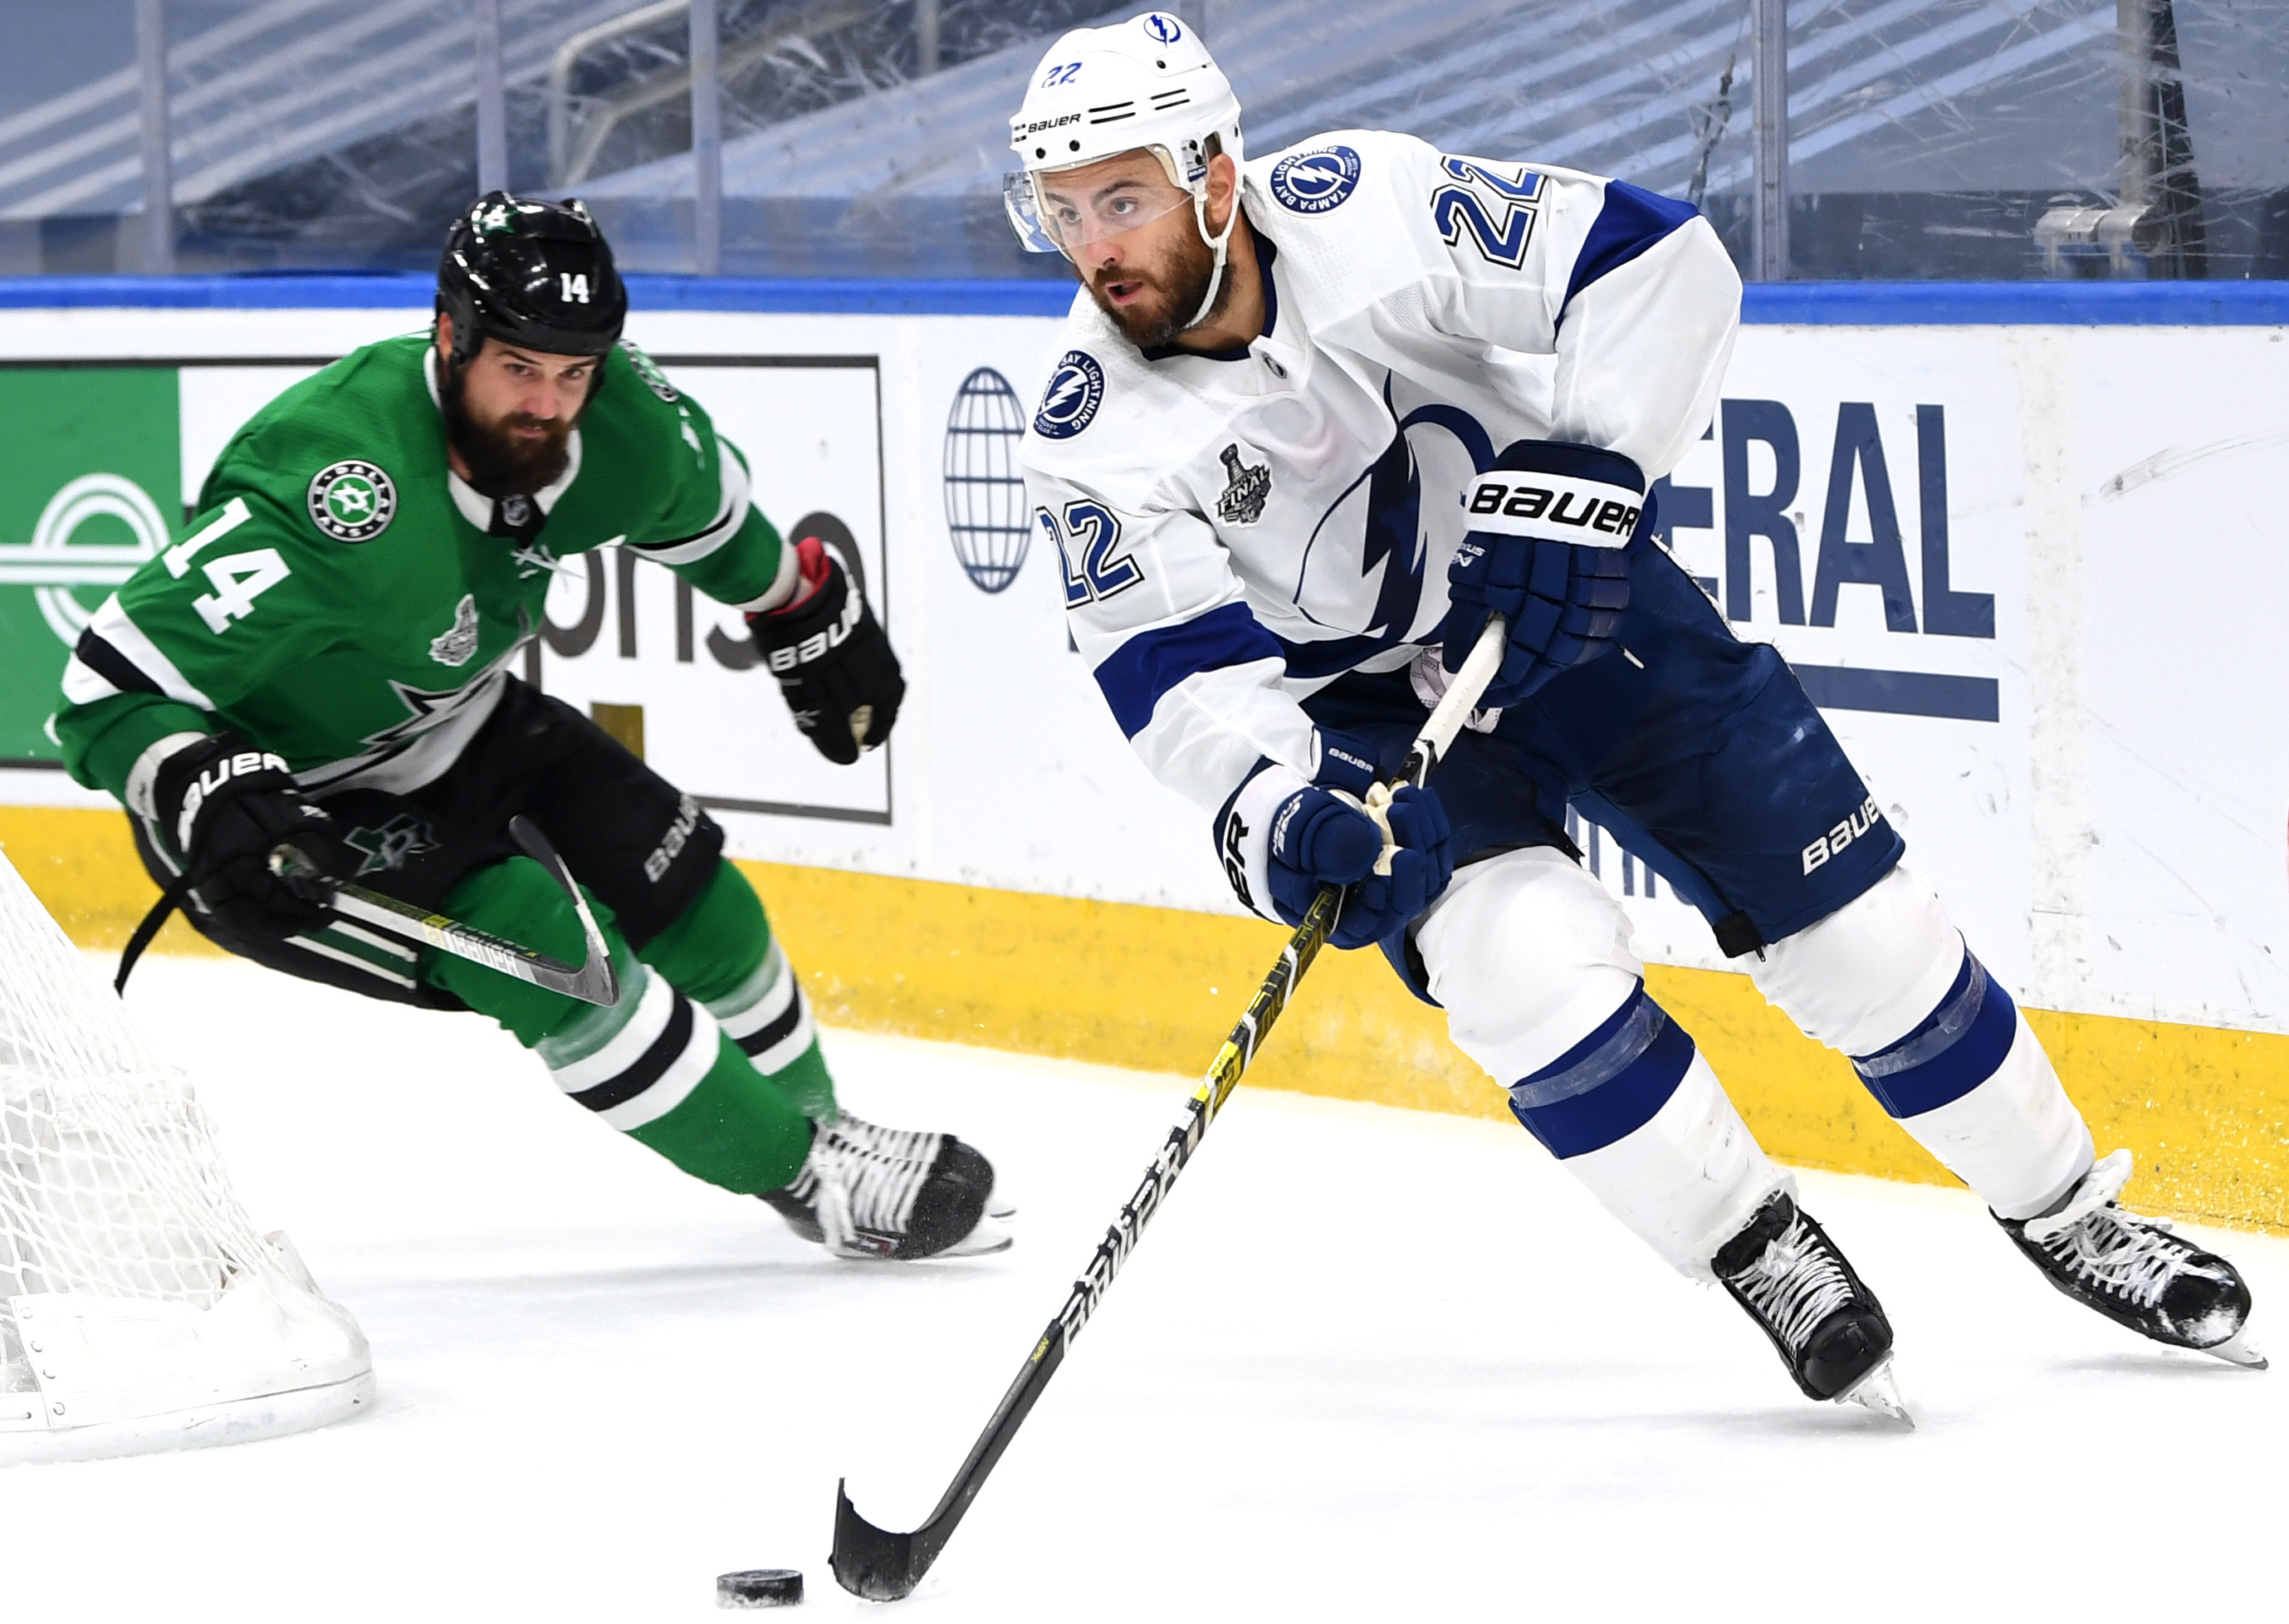 Kevin Shattenkirk #22 of the Tampa Bay Lightning controls the puck as Jamie Benn #14 of the Dallas Stars pursues the play in the third period of Game Four of the NHL Stanley Cup Final between the Tampa Bay Lightning and the Dallas Stars at Rogers Place on September 25, 2020 in Edmonton, Alberta, Canada.